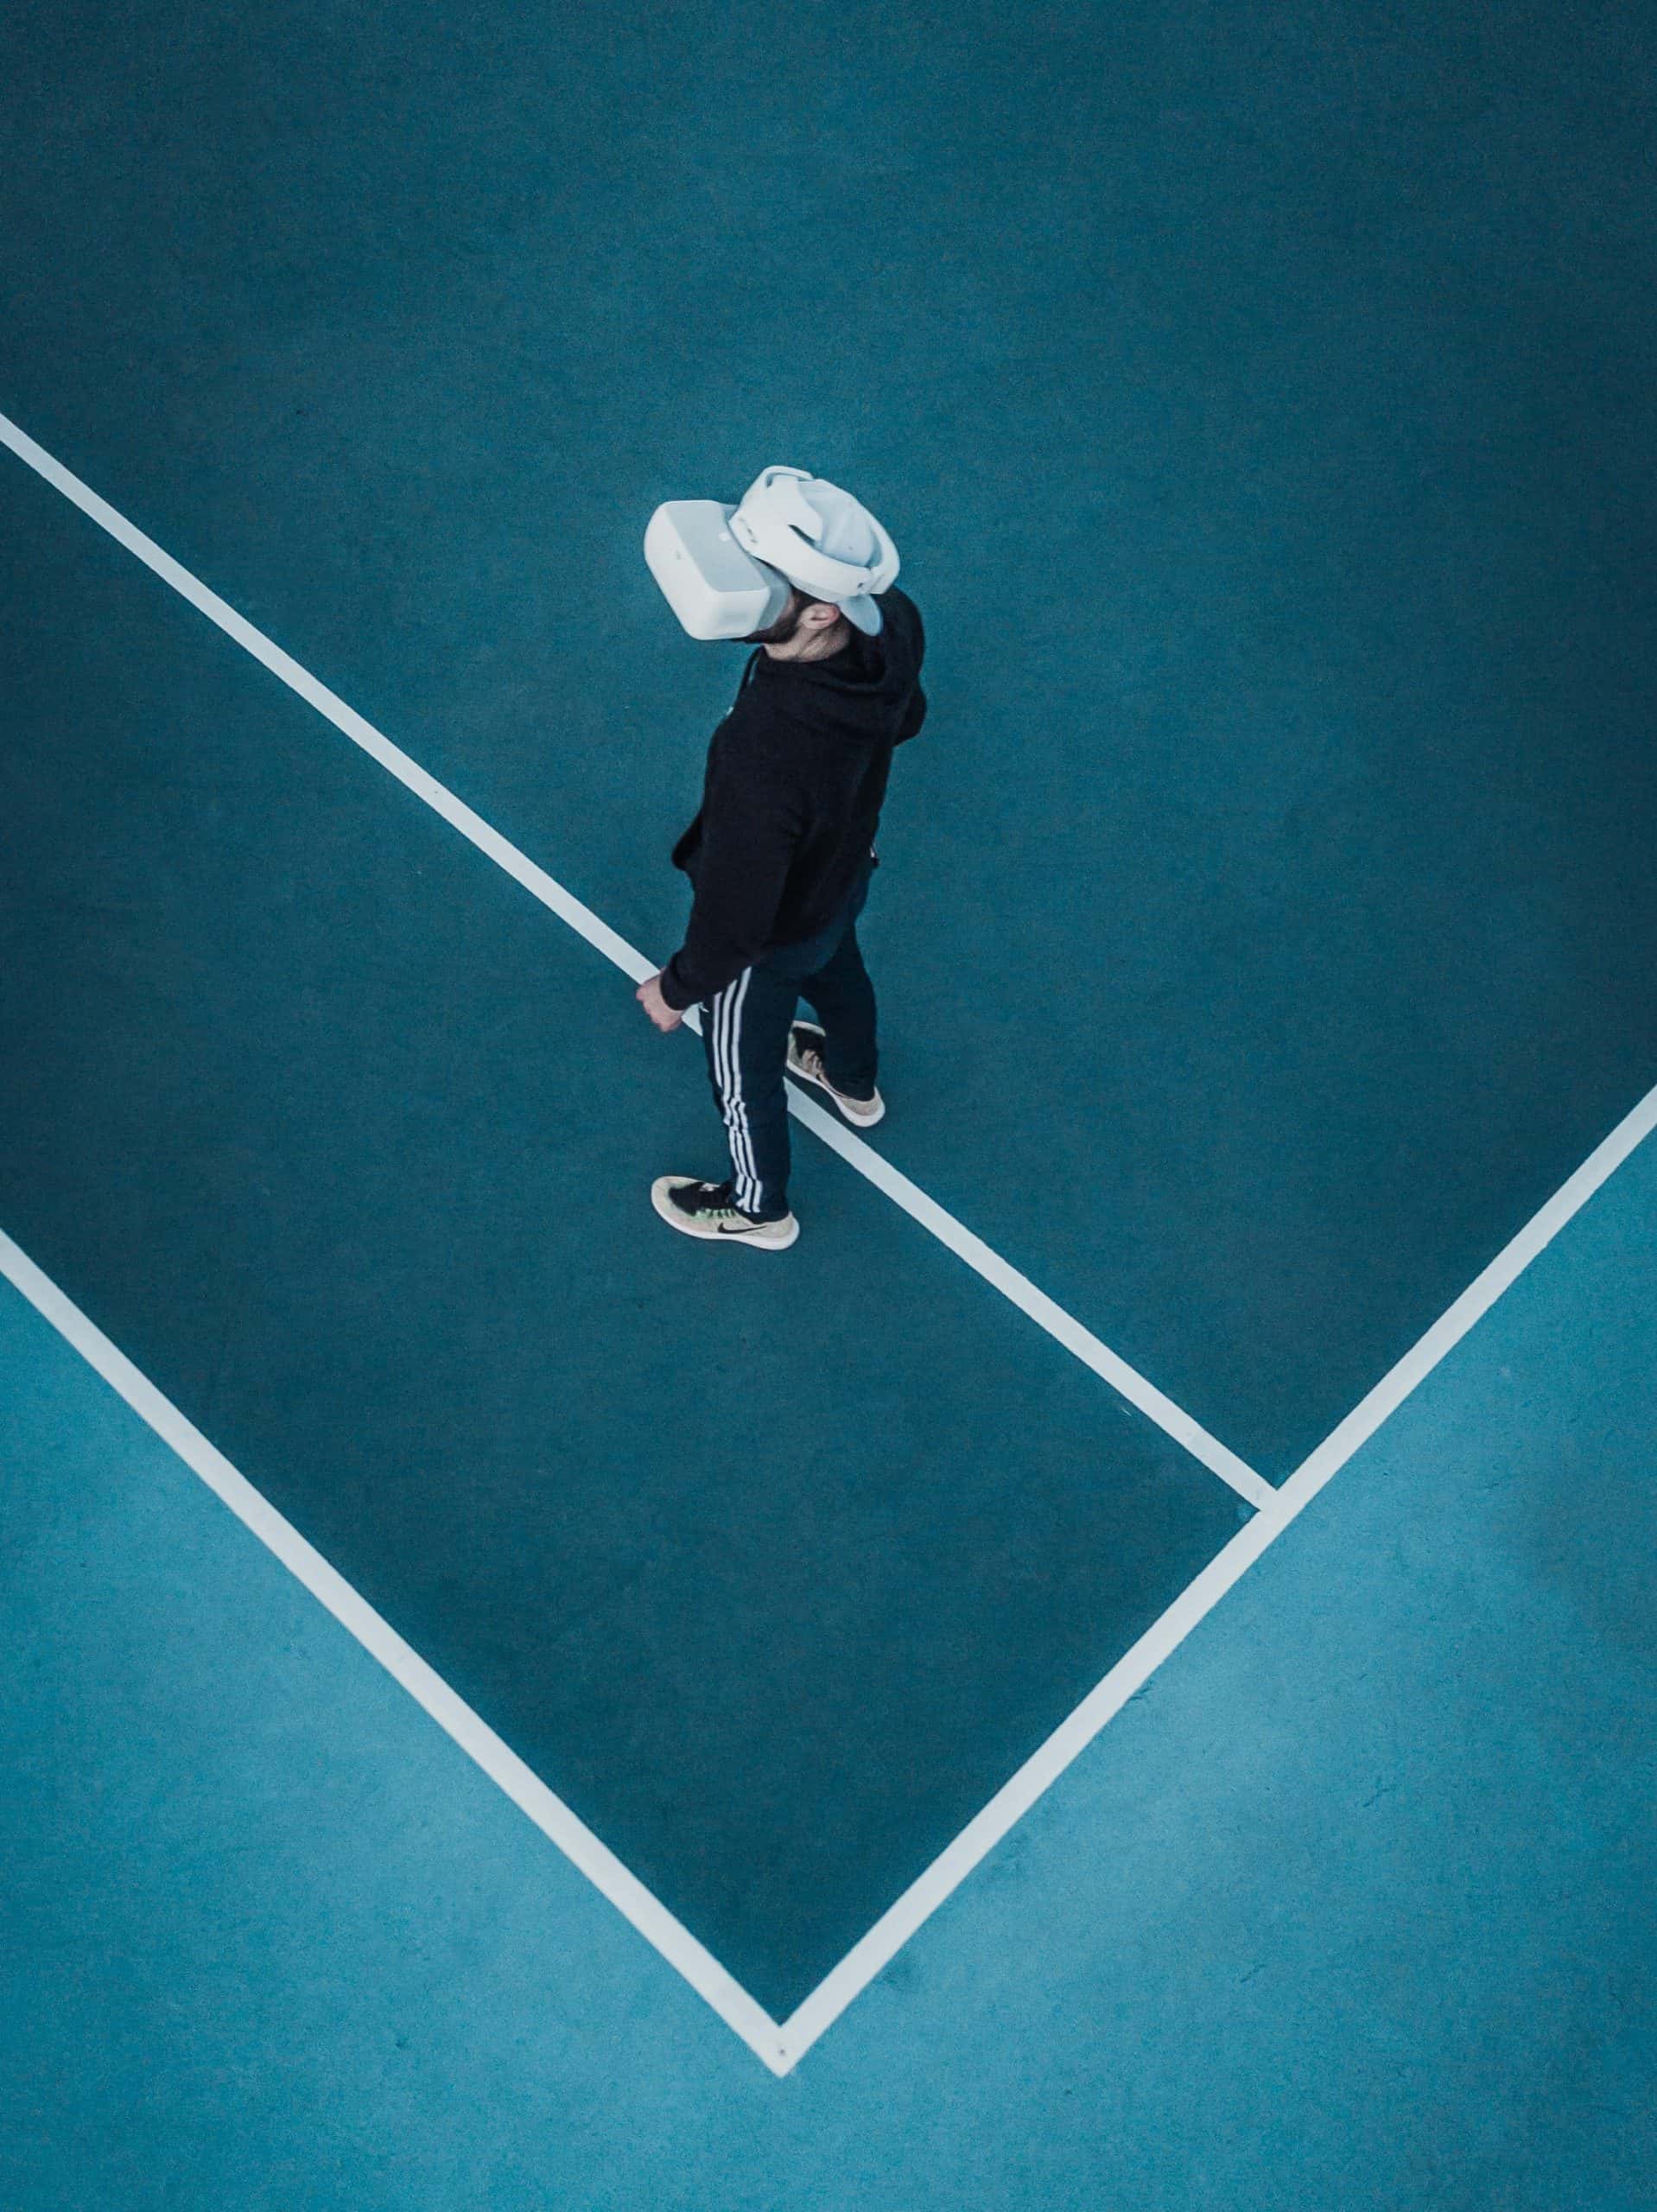 Image of someone wearing a virtual reality headset on a tennis court